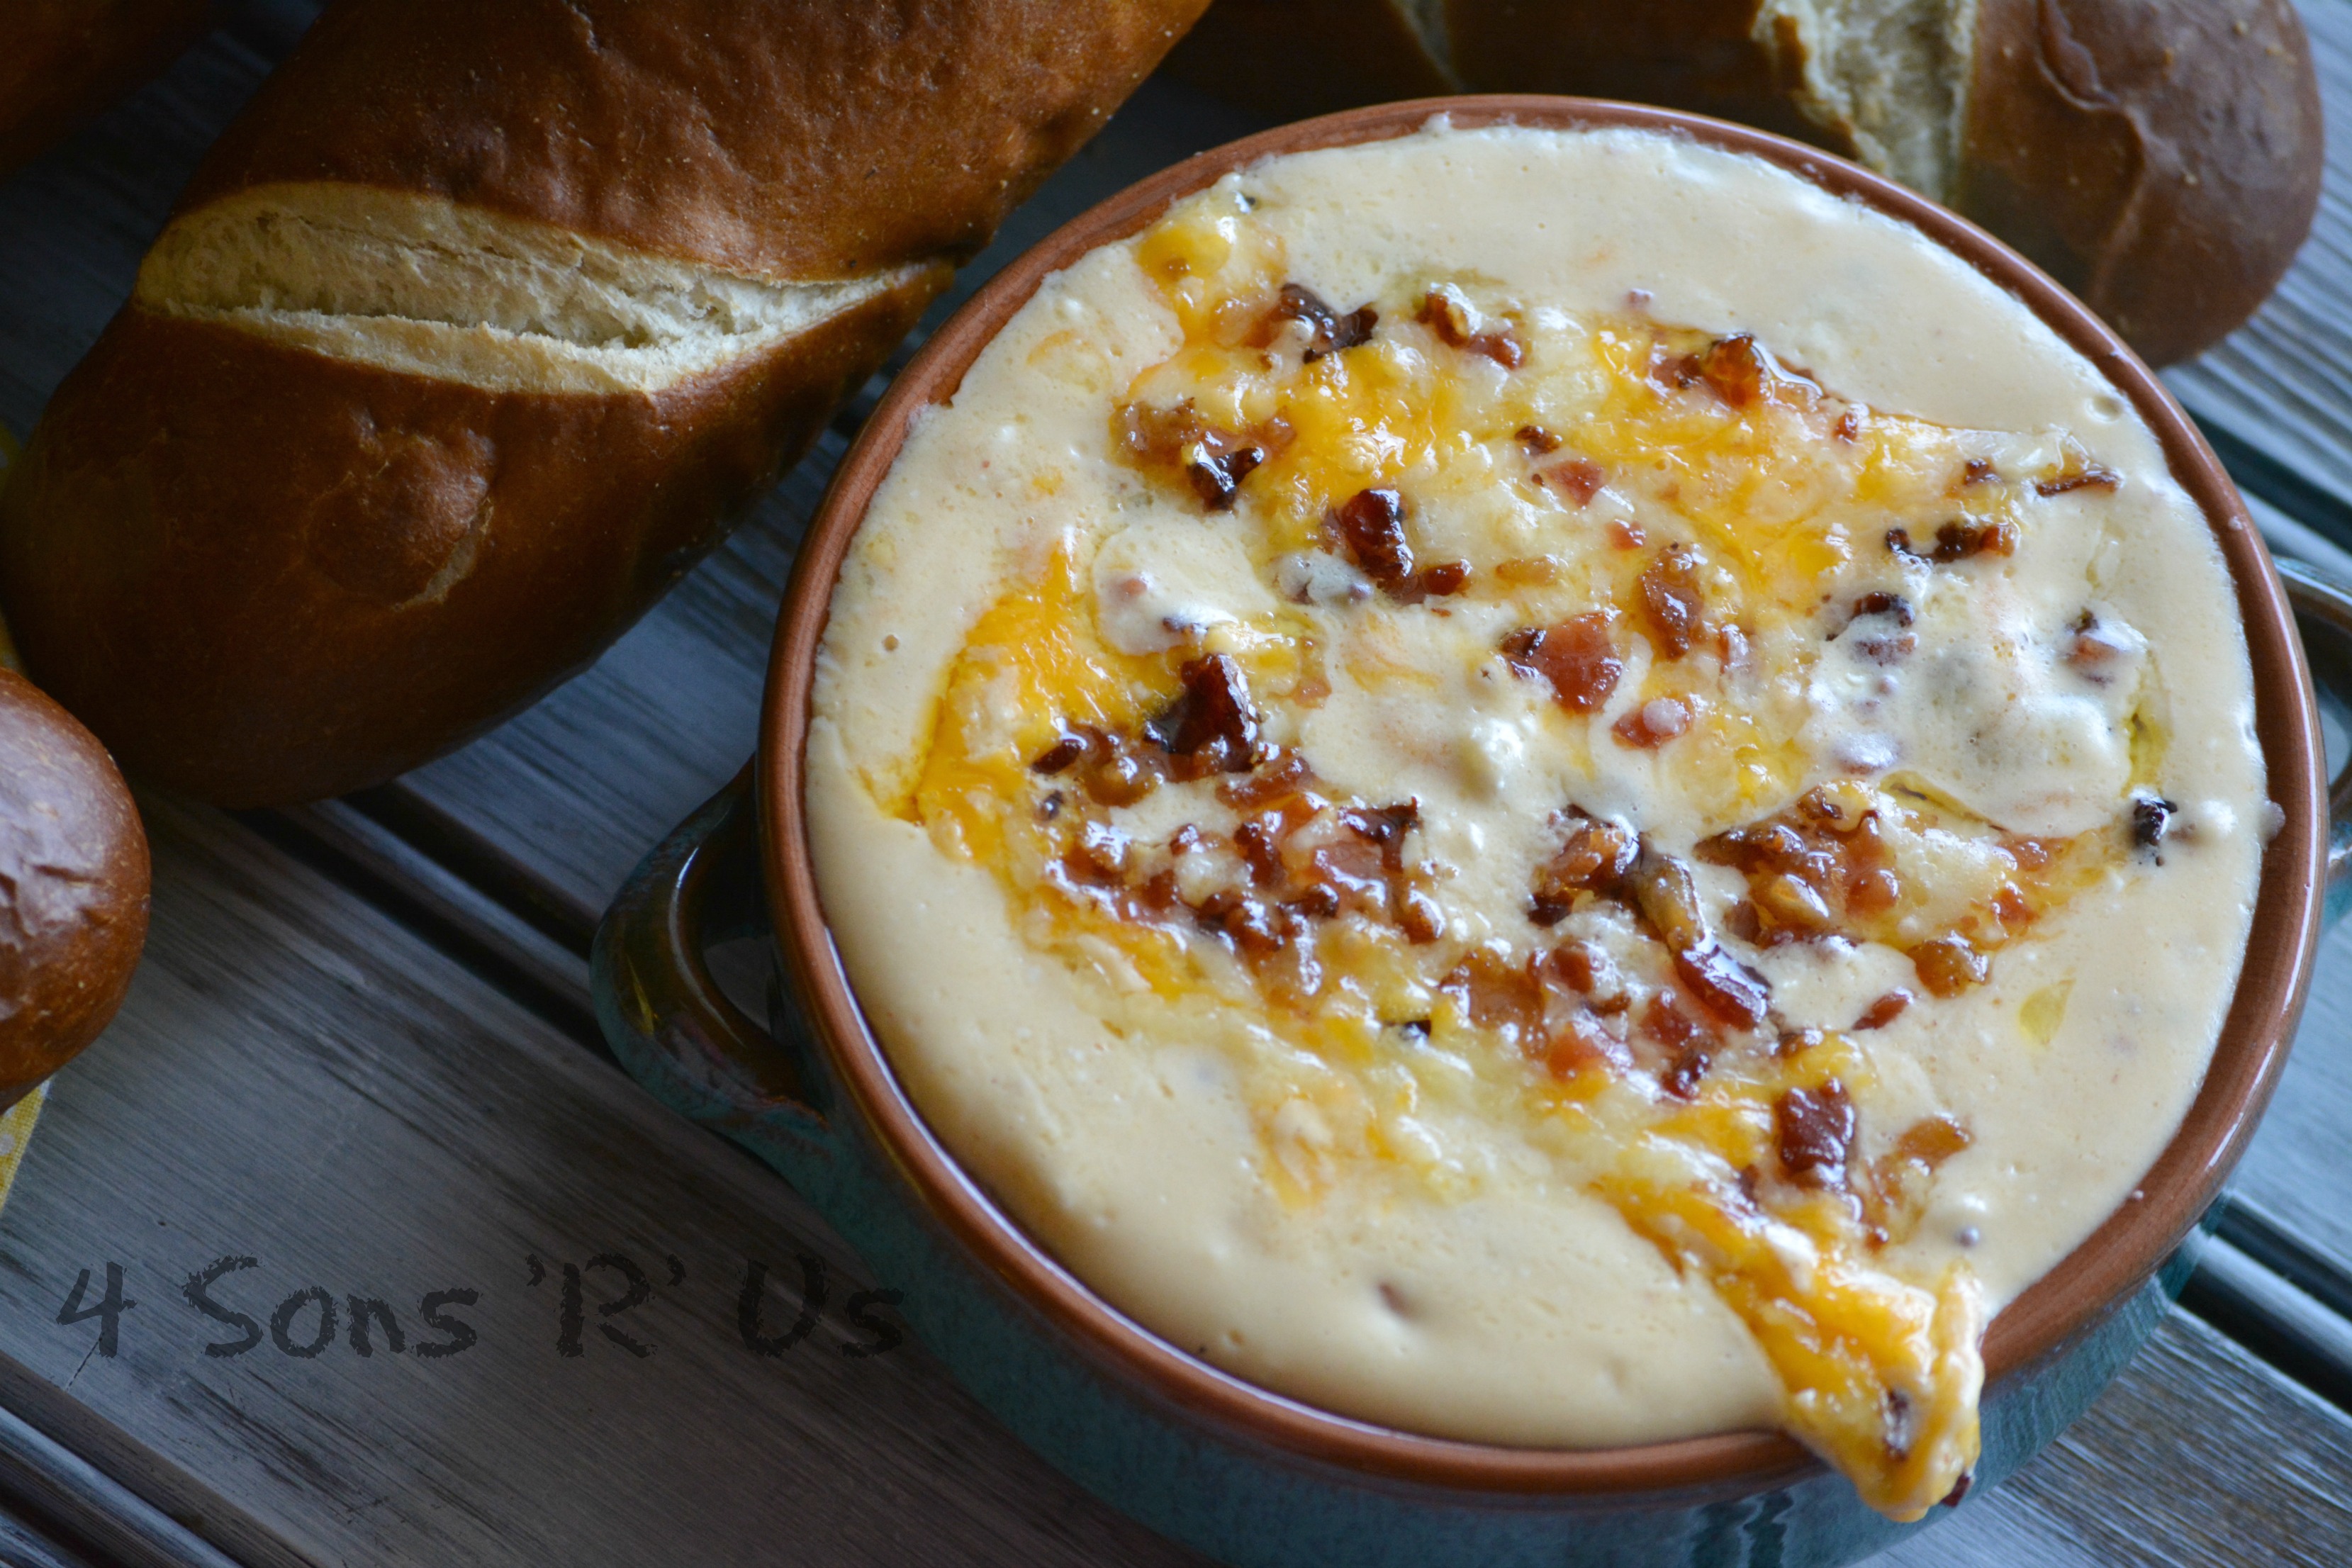 Bacon Beer Cheese Dip 4 Sons R Us